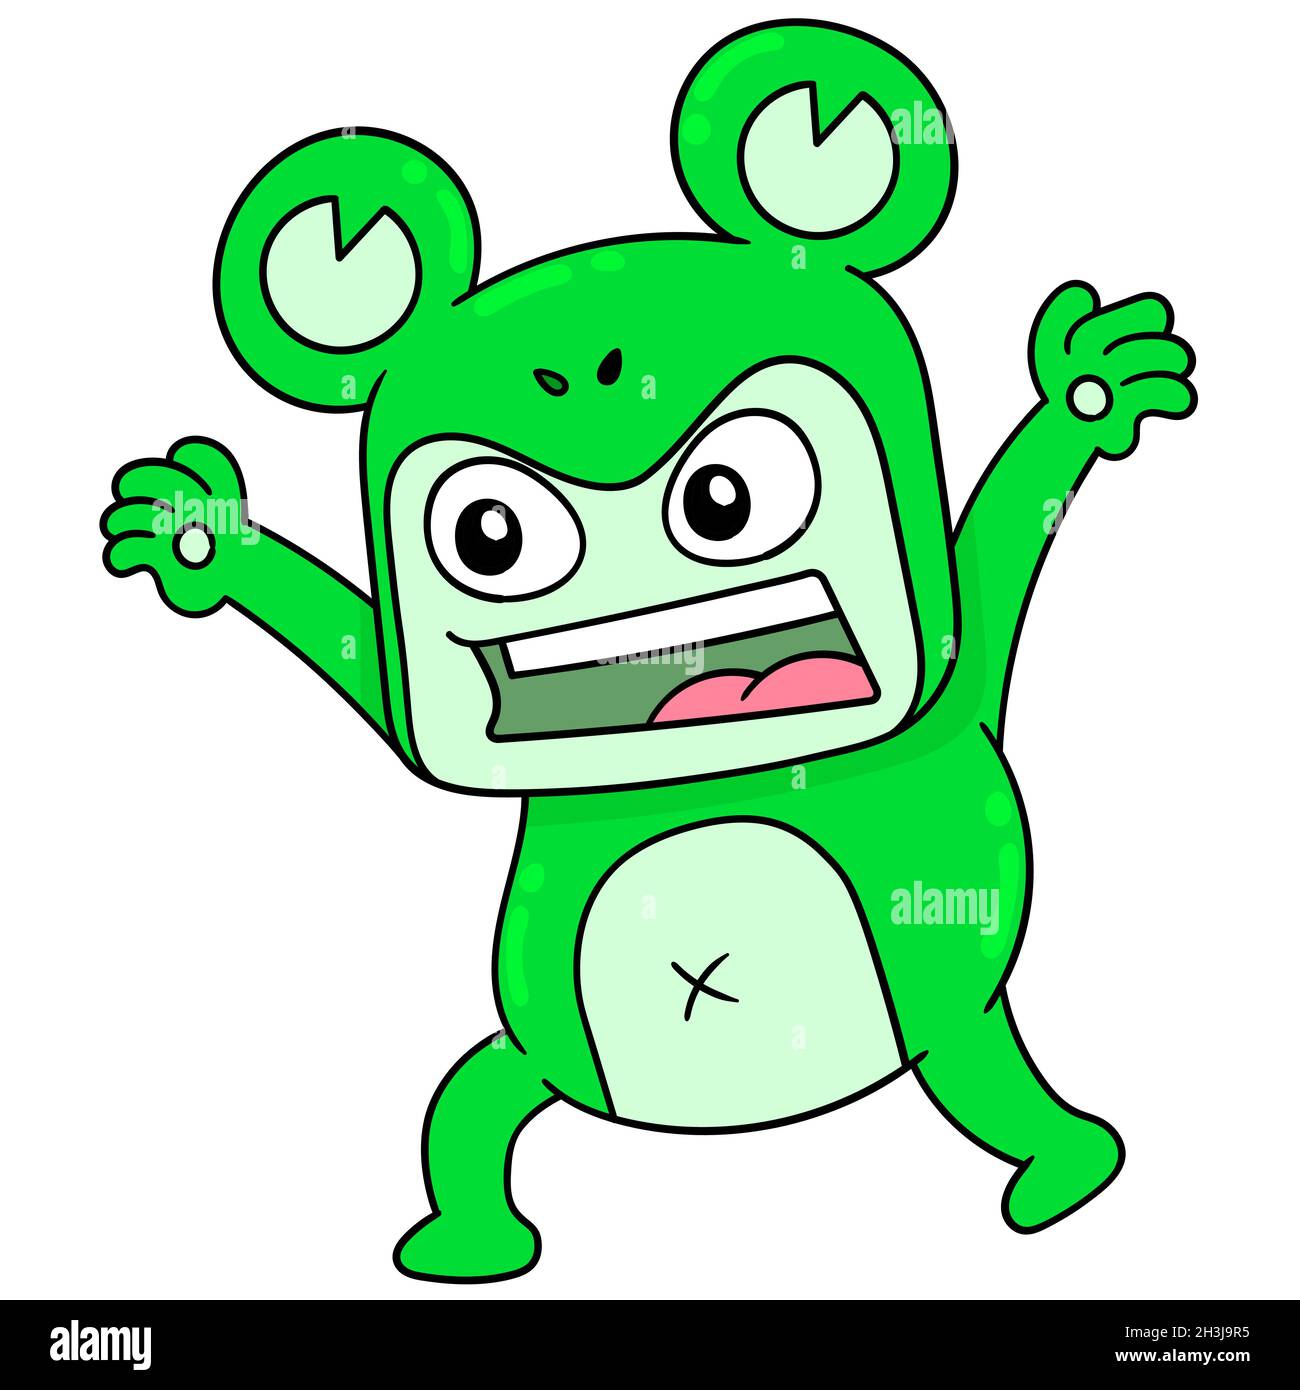 the human in the costume of a frog monster tries to frighten him Stock Vector